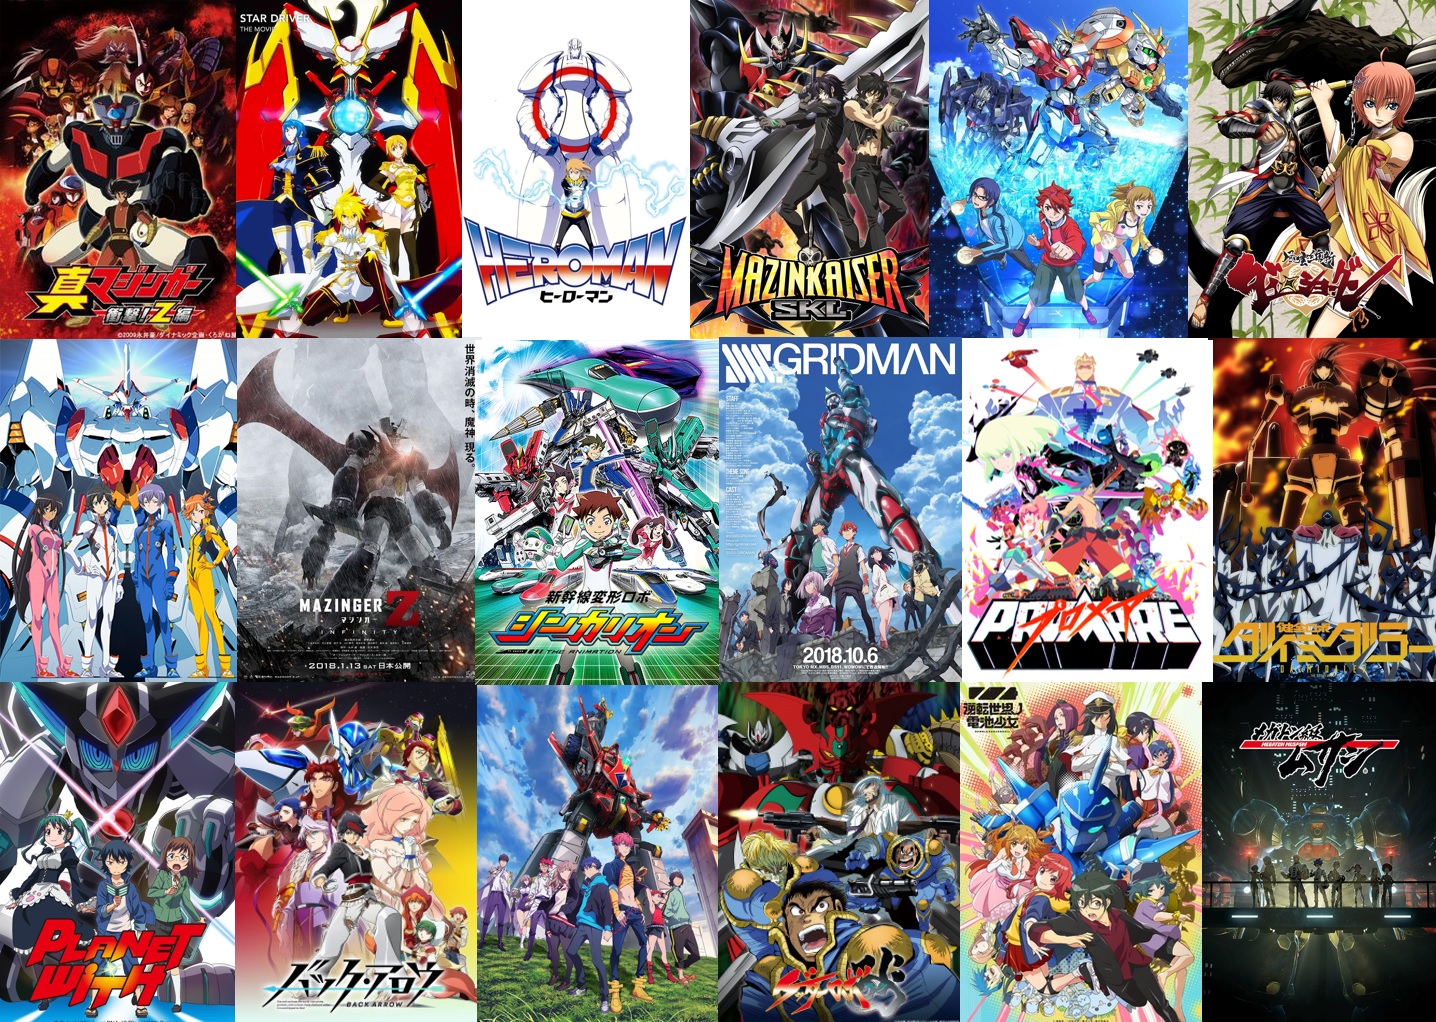 SSSSRW.D180223 #SRW on X: 1 week's worth of SSSS.Dynazenon Vol 1  Blu-ray/DVD sales is already more than most anime of the spring season.  Anituber/MAL/Anitrendz/Whatever shilling can only go so far & its